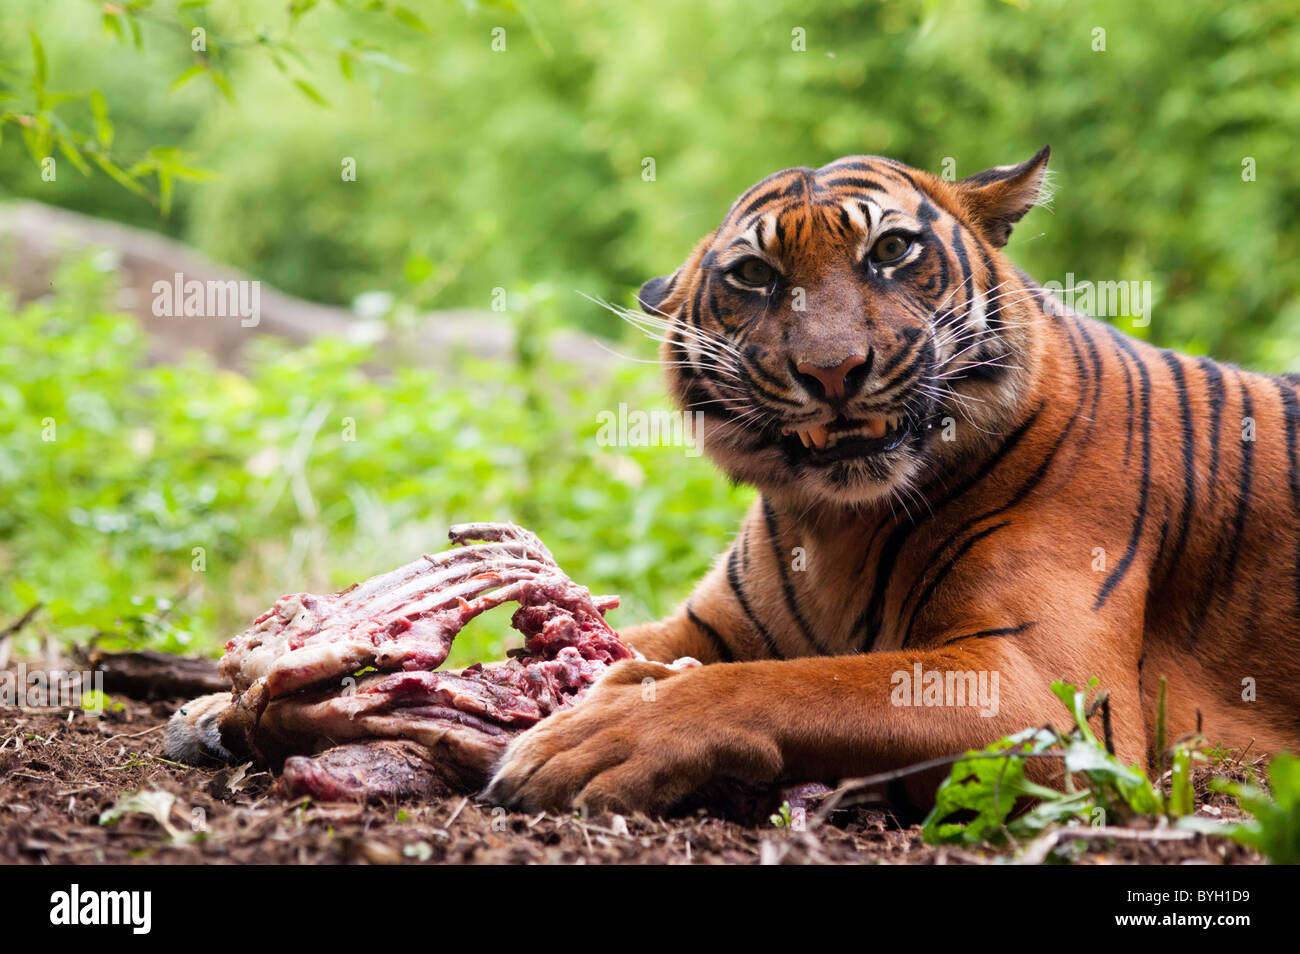 Sumatran tiger eating its prey on the forest floor Stock Photo